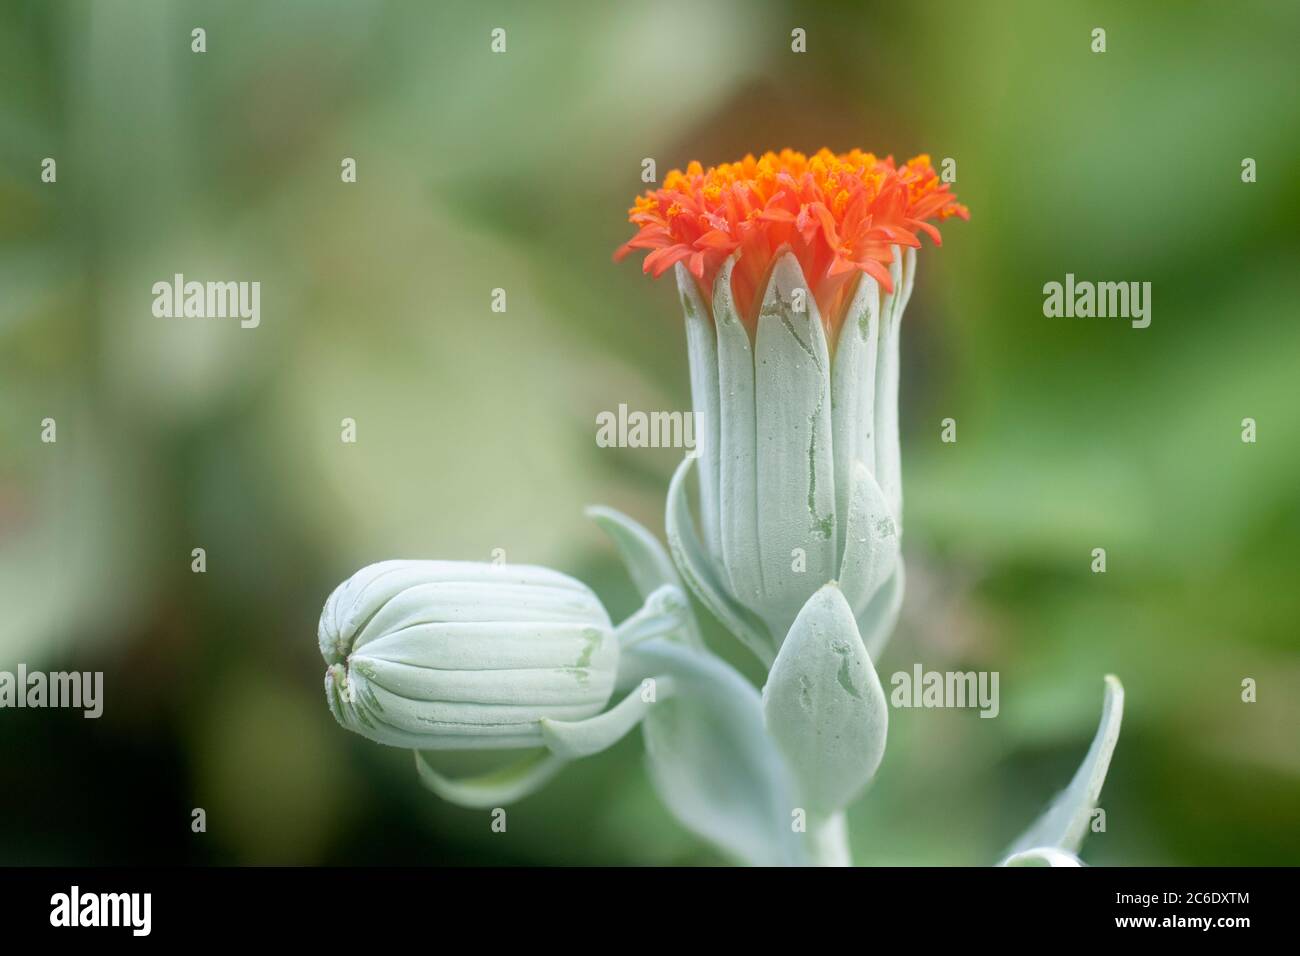 Close up of a flowering Kleinia fulgens common names include Scarlet Kleinia, Coral Senecio (in the past was Senecio fulgens) is a species from the ge Stock Photo